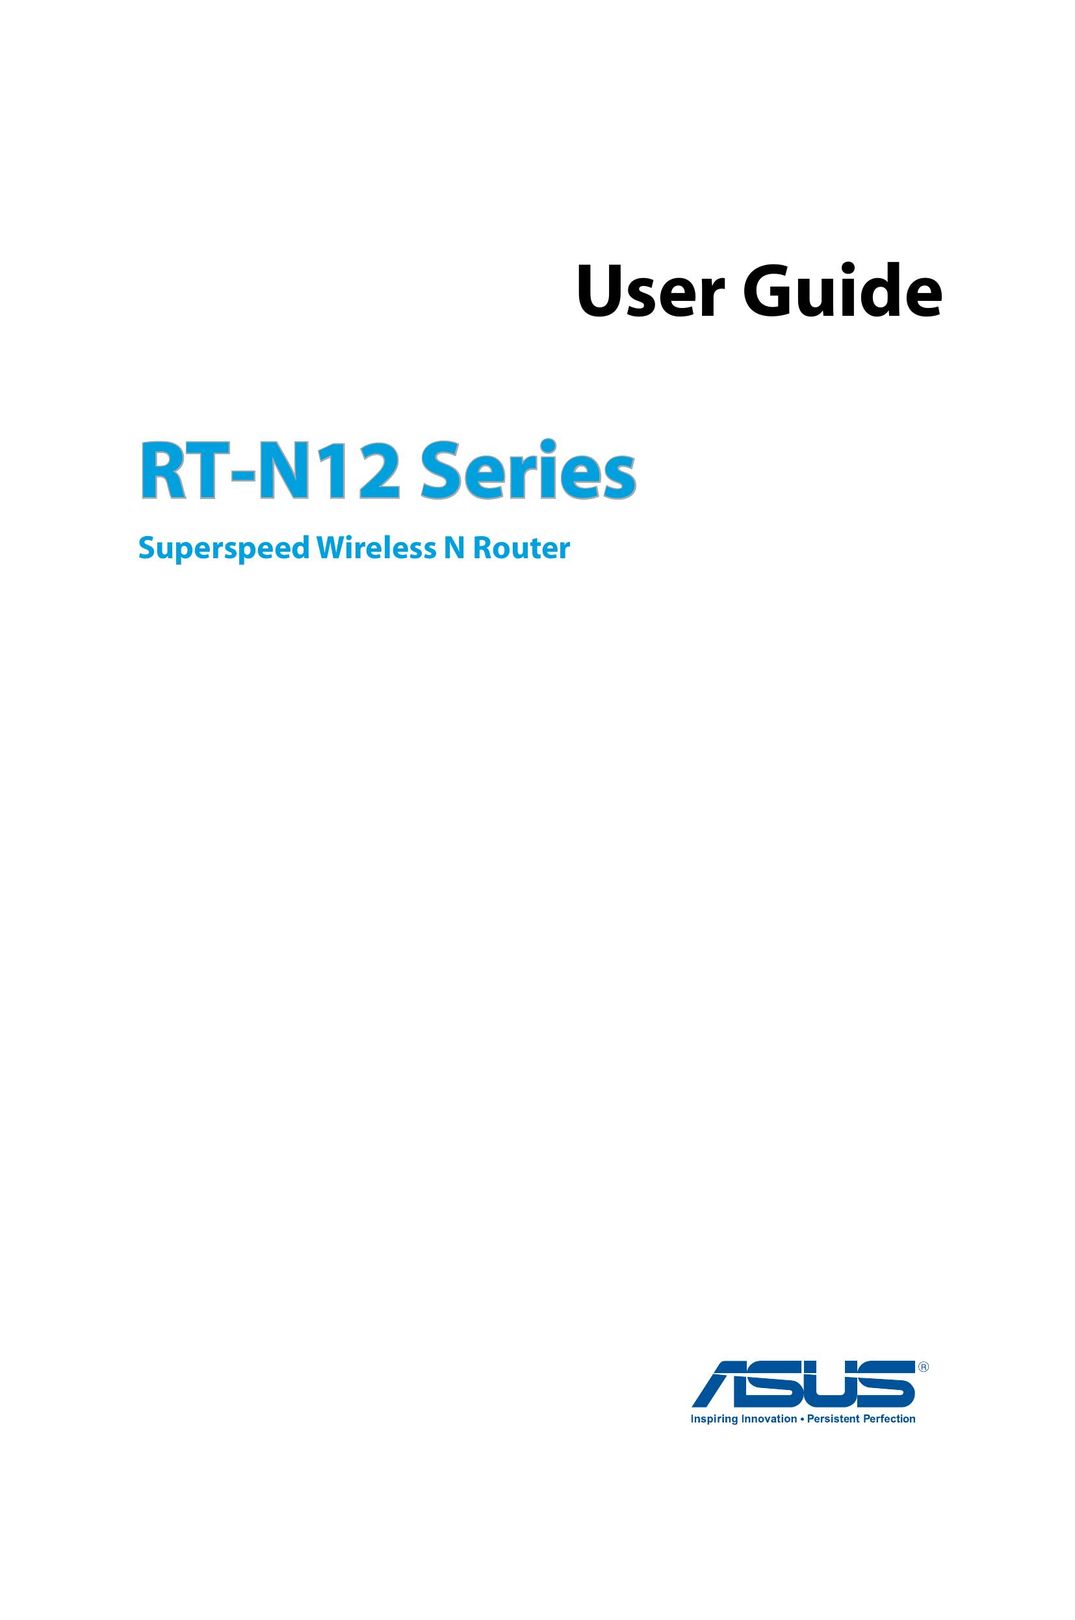 Asus RT-N12/D1 Network Router User Manual